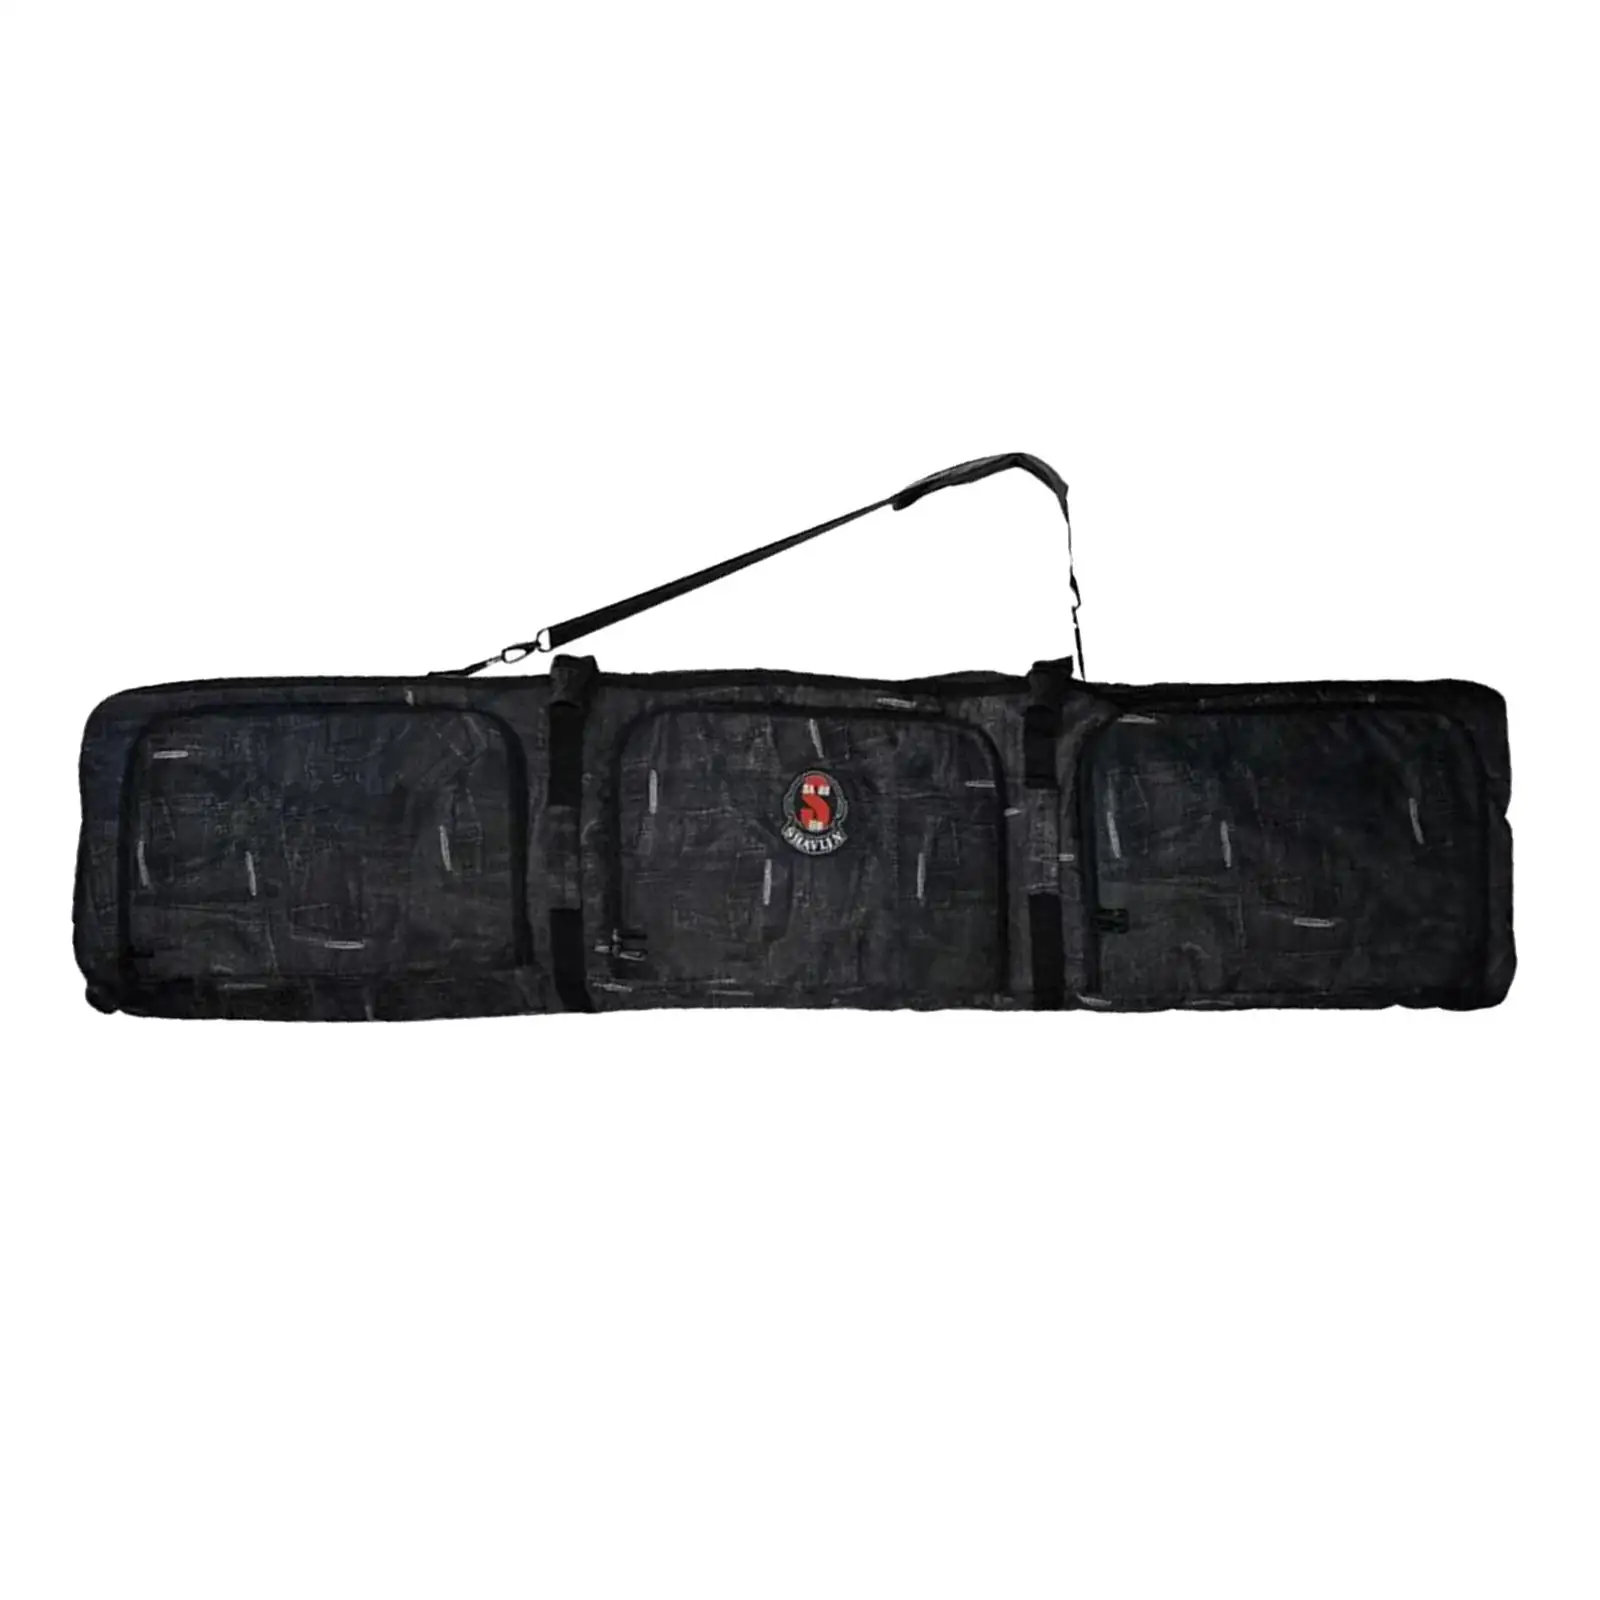 Snowboard Bag with Wheels Waterproof Folding Protective Gear for Ski Storage Bag